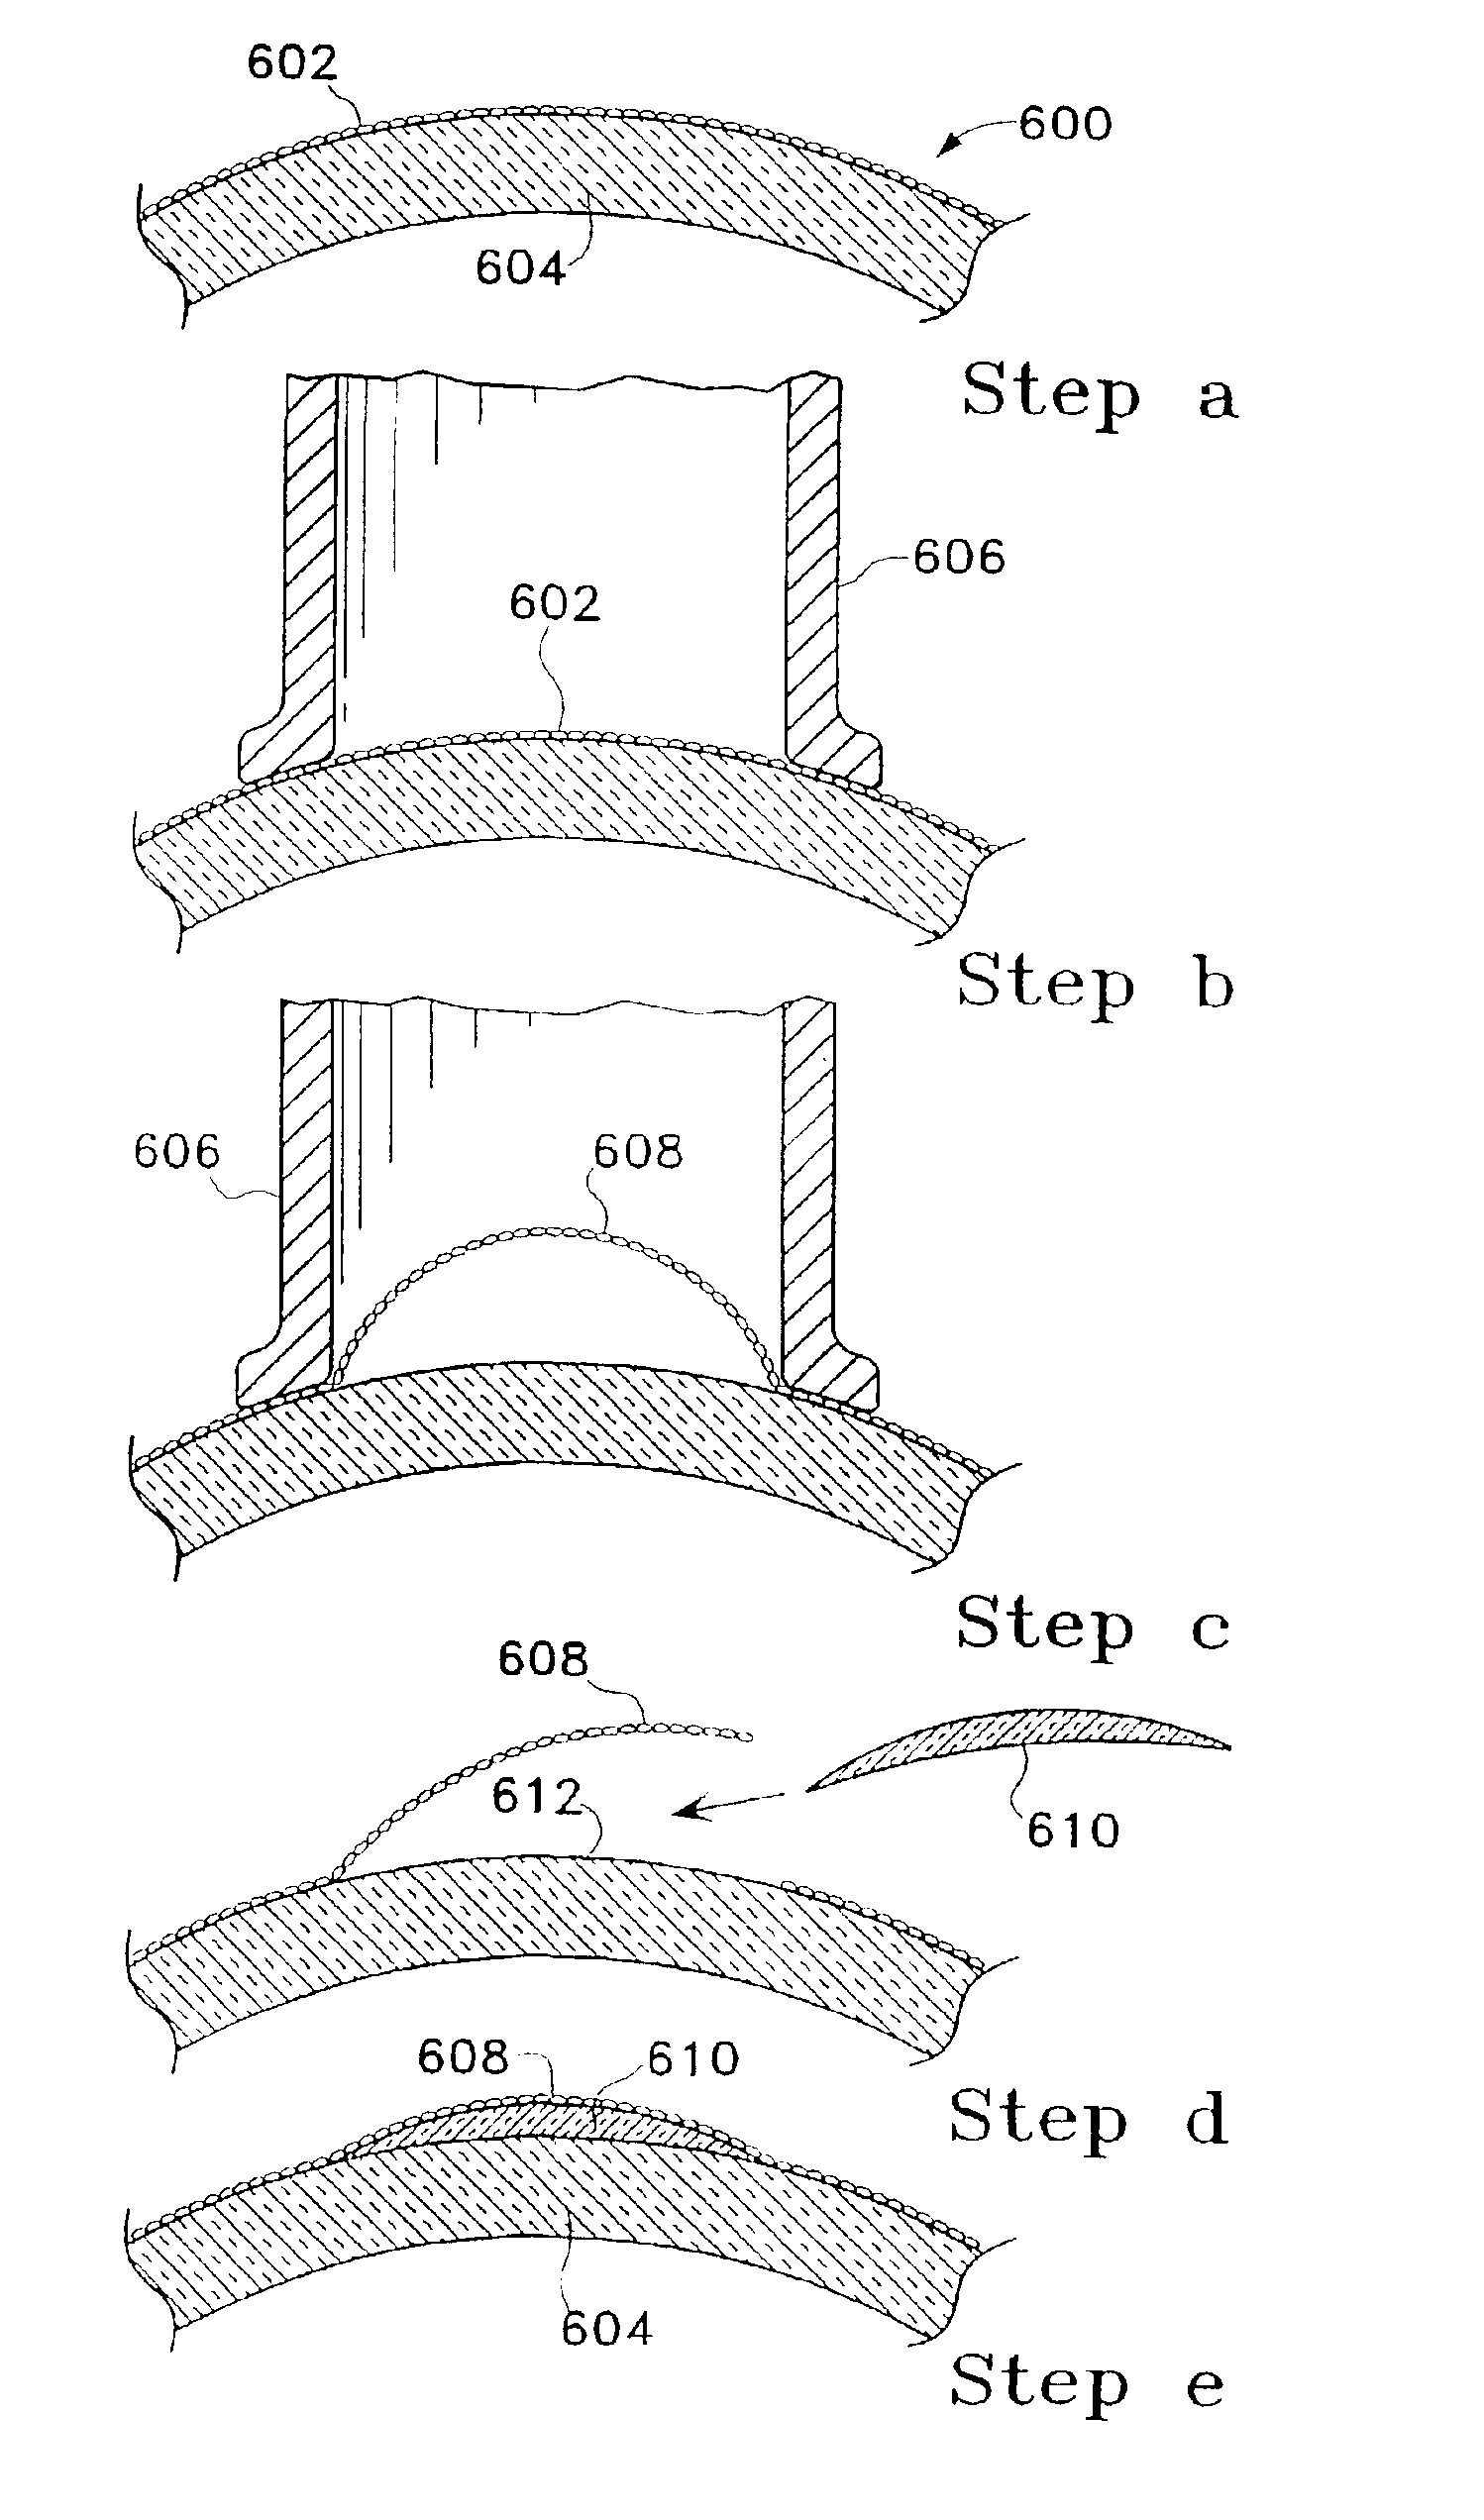 Method of lifting an epithelial layer and placing a corrective lens beneath it